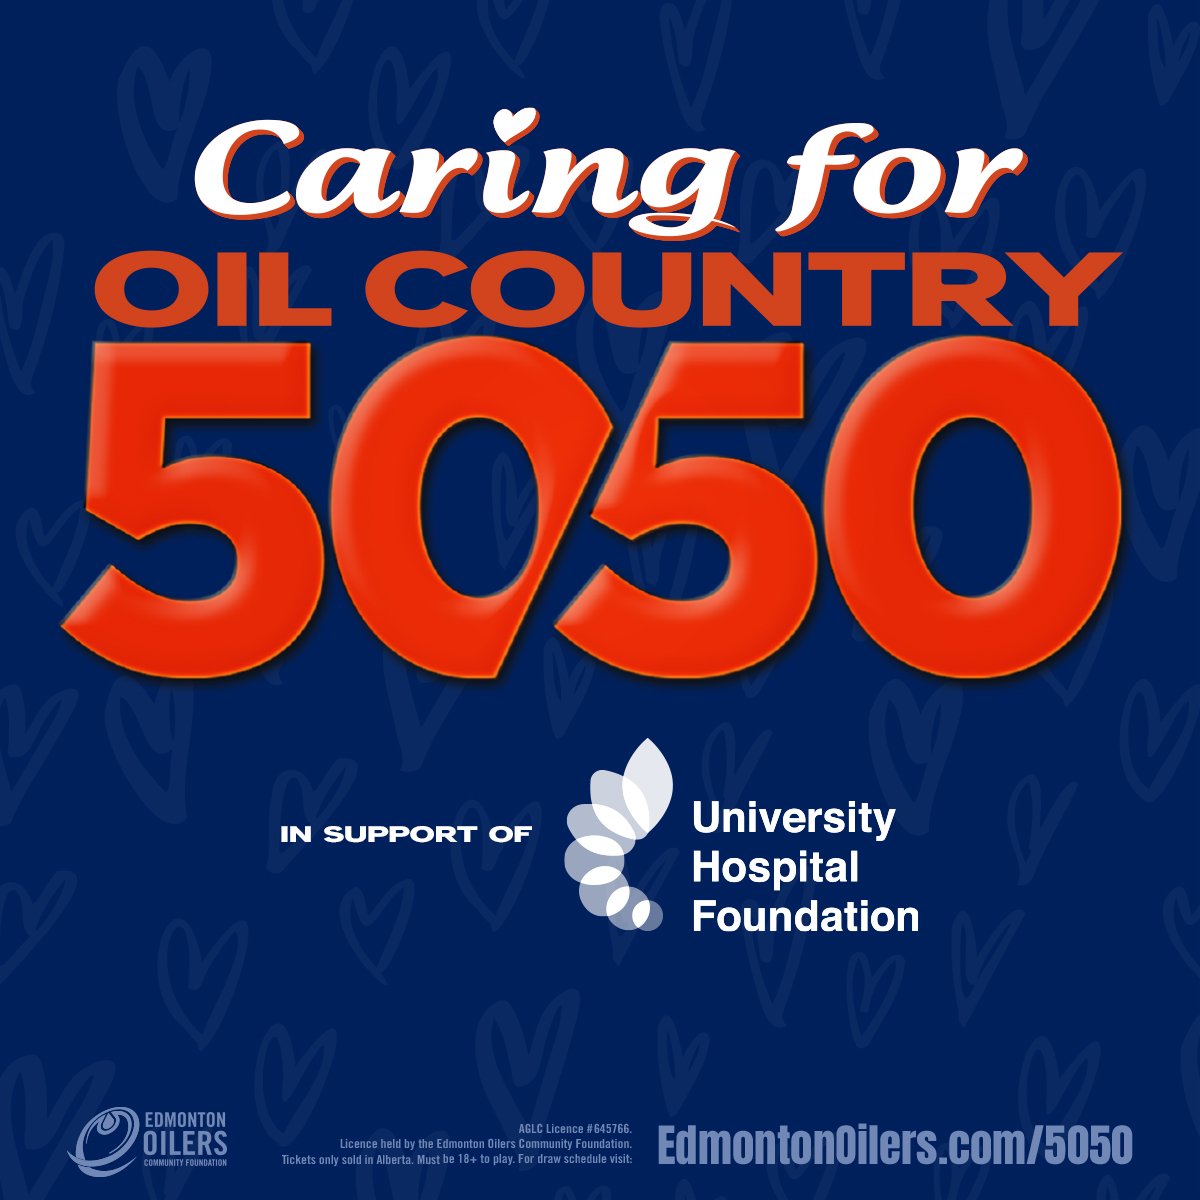 Congrats to the holder of 50/50 ticket A-100273095 who's won $500 for Esso & the holder of ticket B-102478054 who's scored seats for an #Oilers playoff game! Thanks for supporting @GiveToUHF! The Caring for Oil Country jackpot is over $650,000! 🎟 EdmontonOilers.com/5050tw